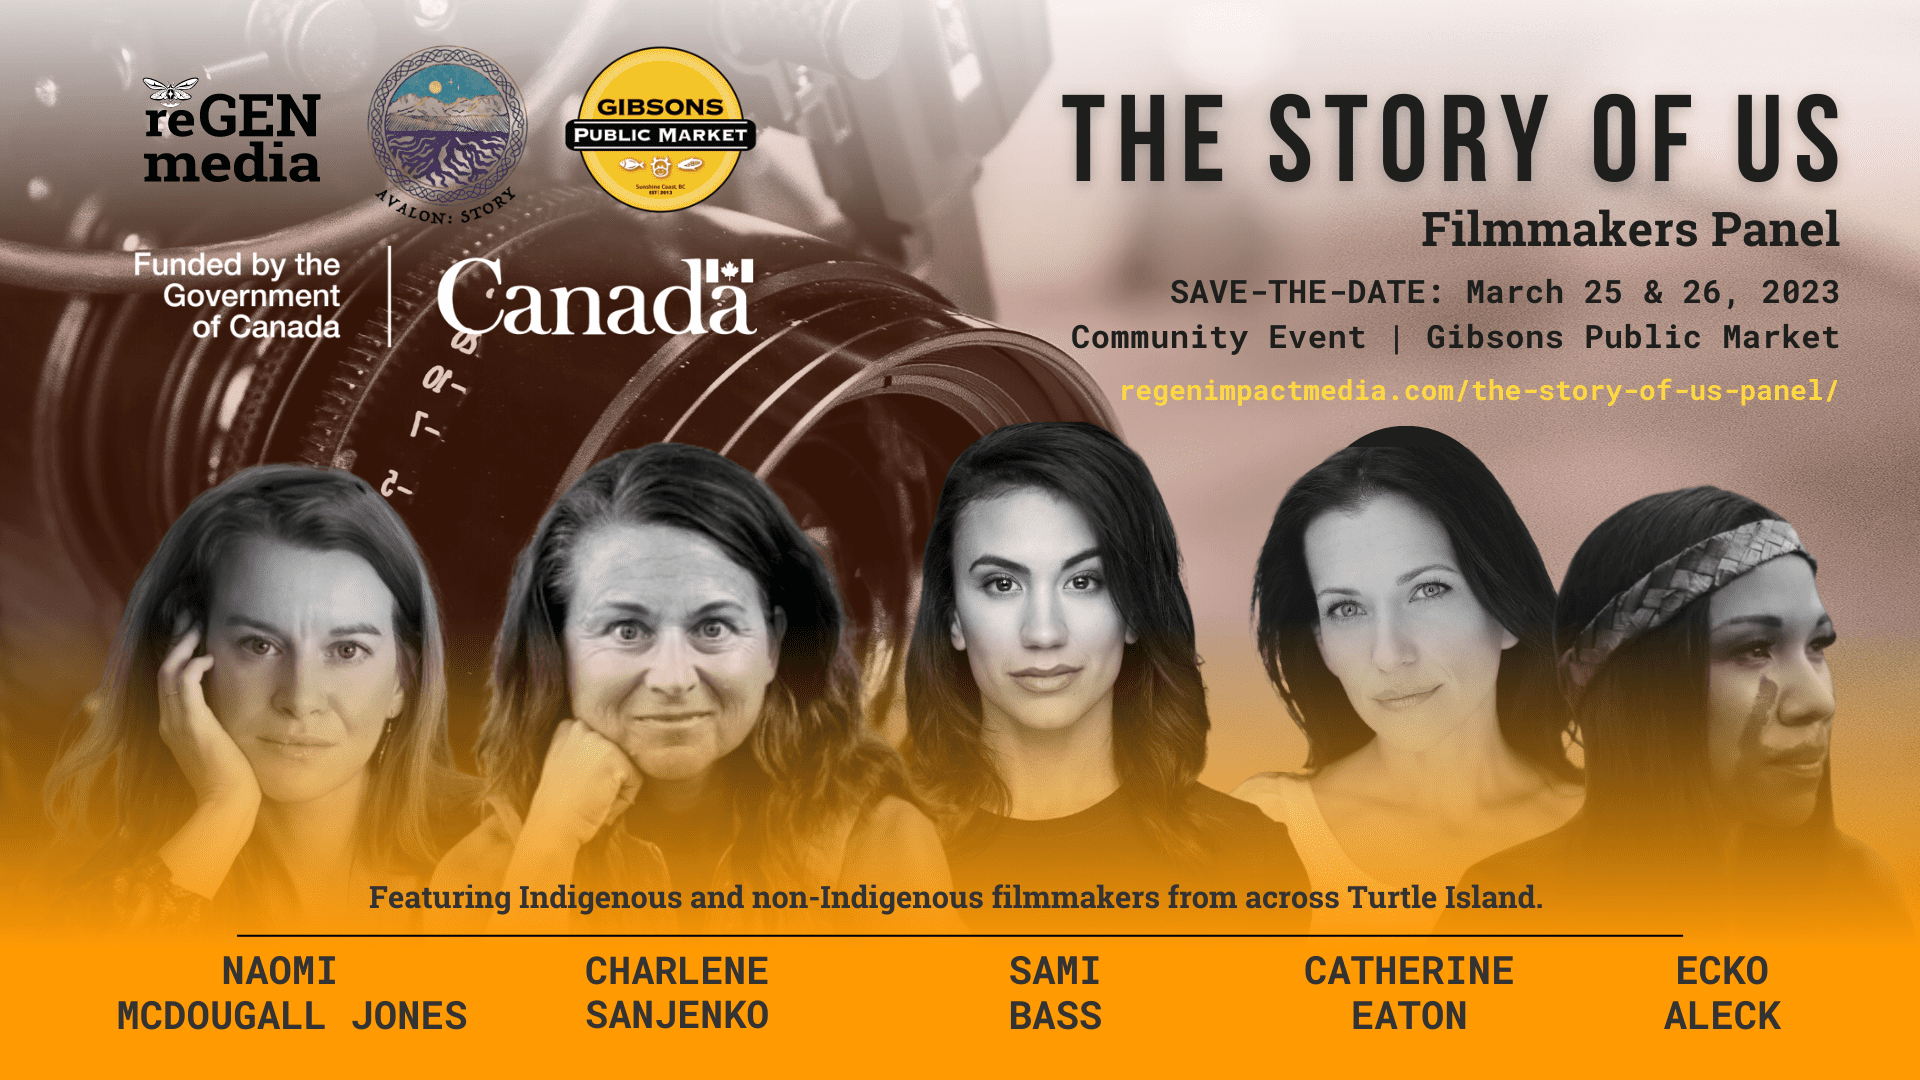 Live Filmmaker's Panel happening in Gibsons BC - click for more details